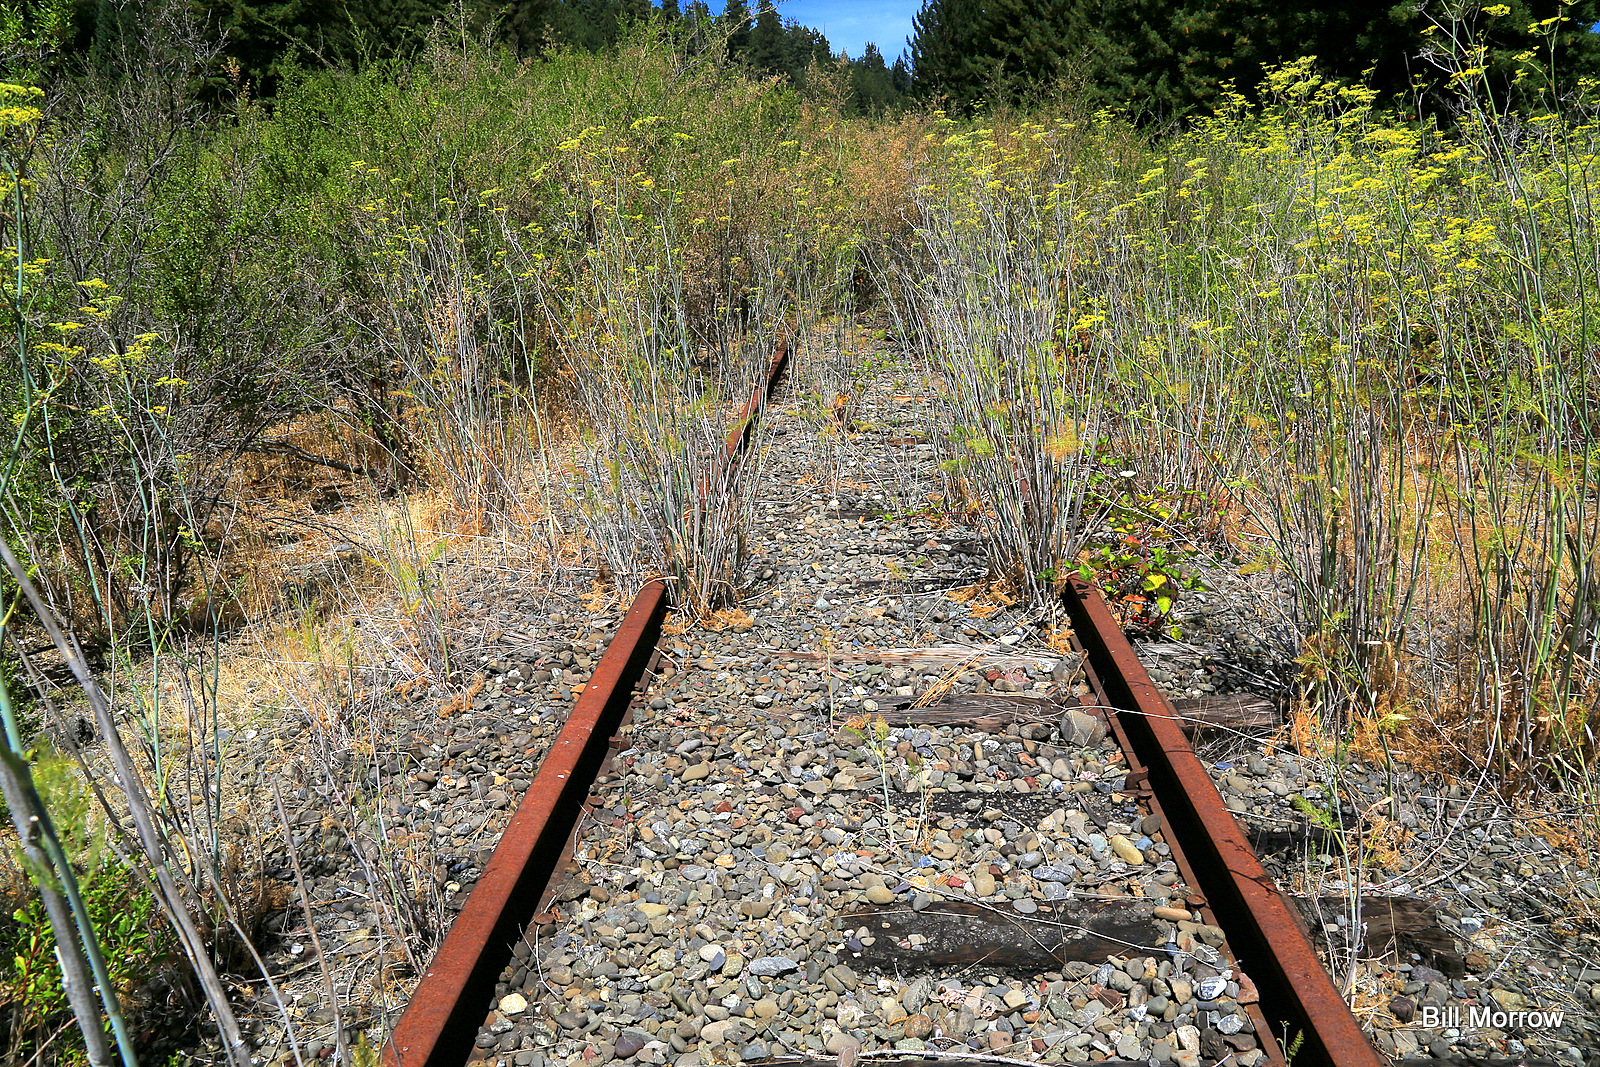 a railway line running through the trees with some rocks and dead plants